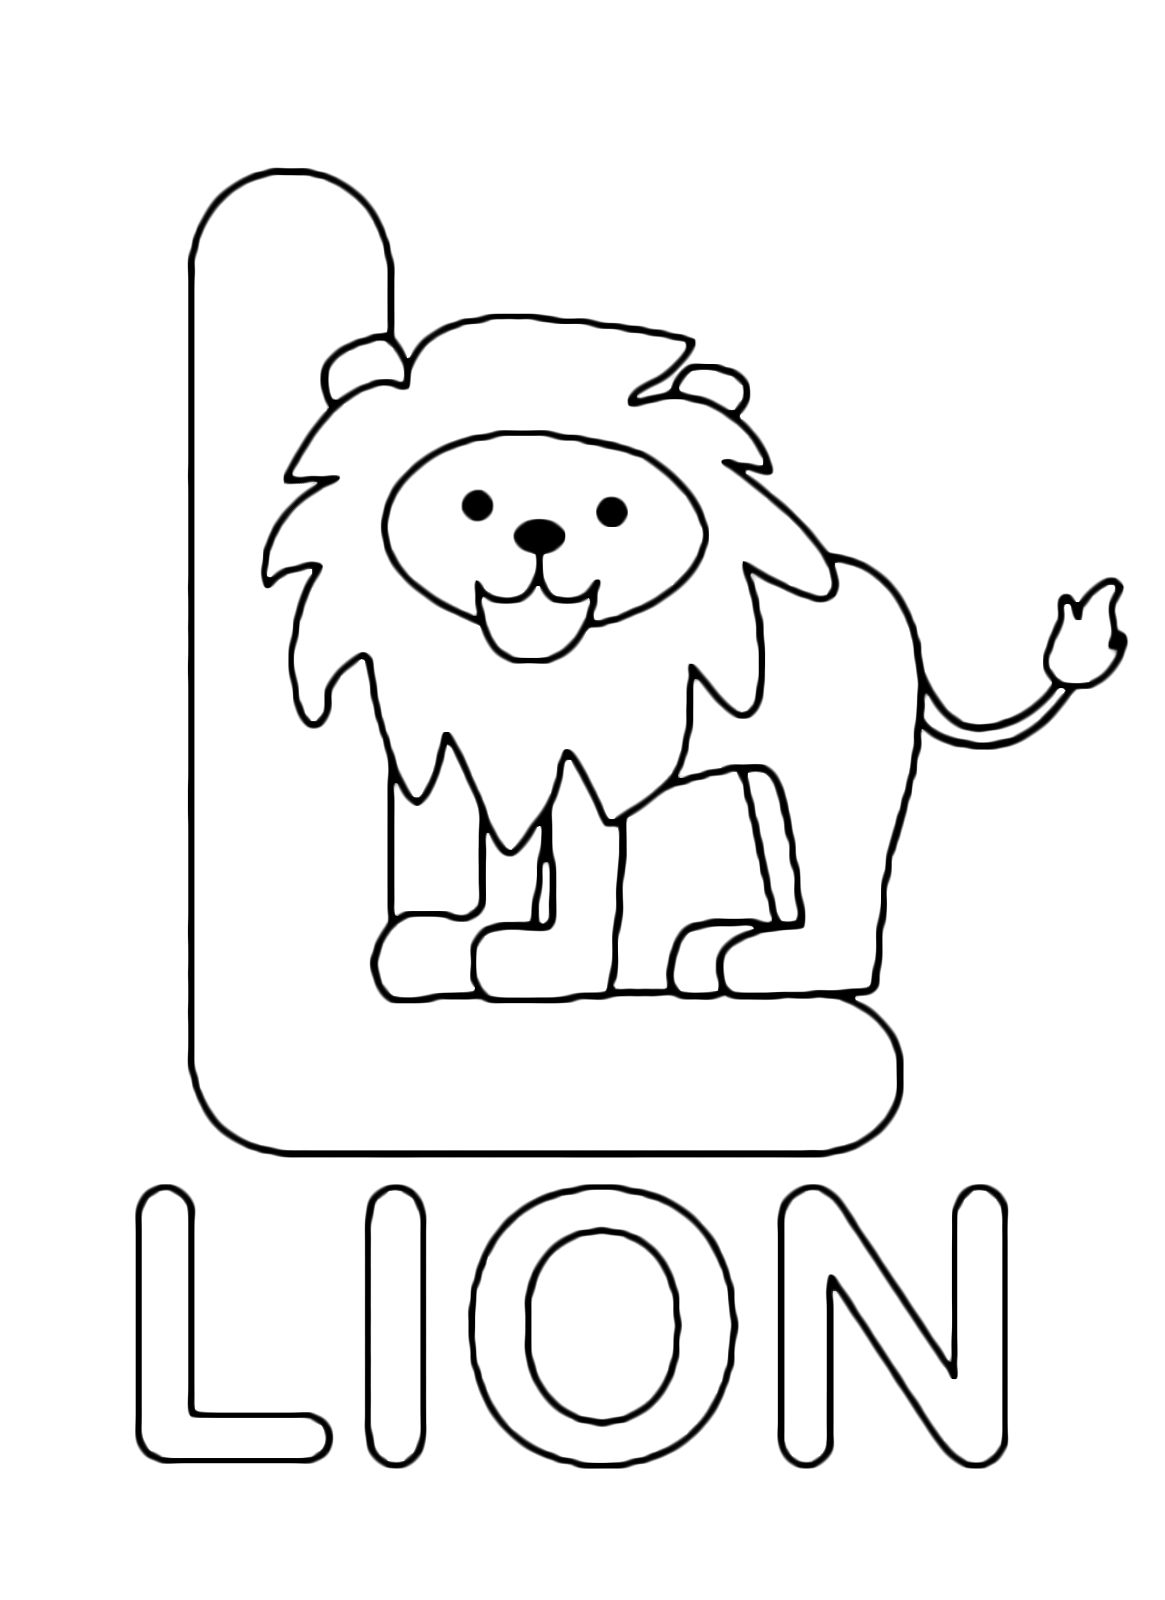 Letters and numbers - L for lion uppercase letter